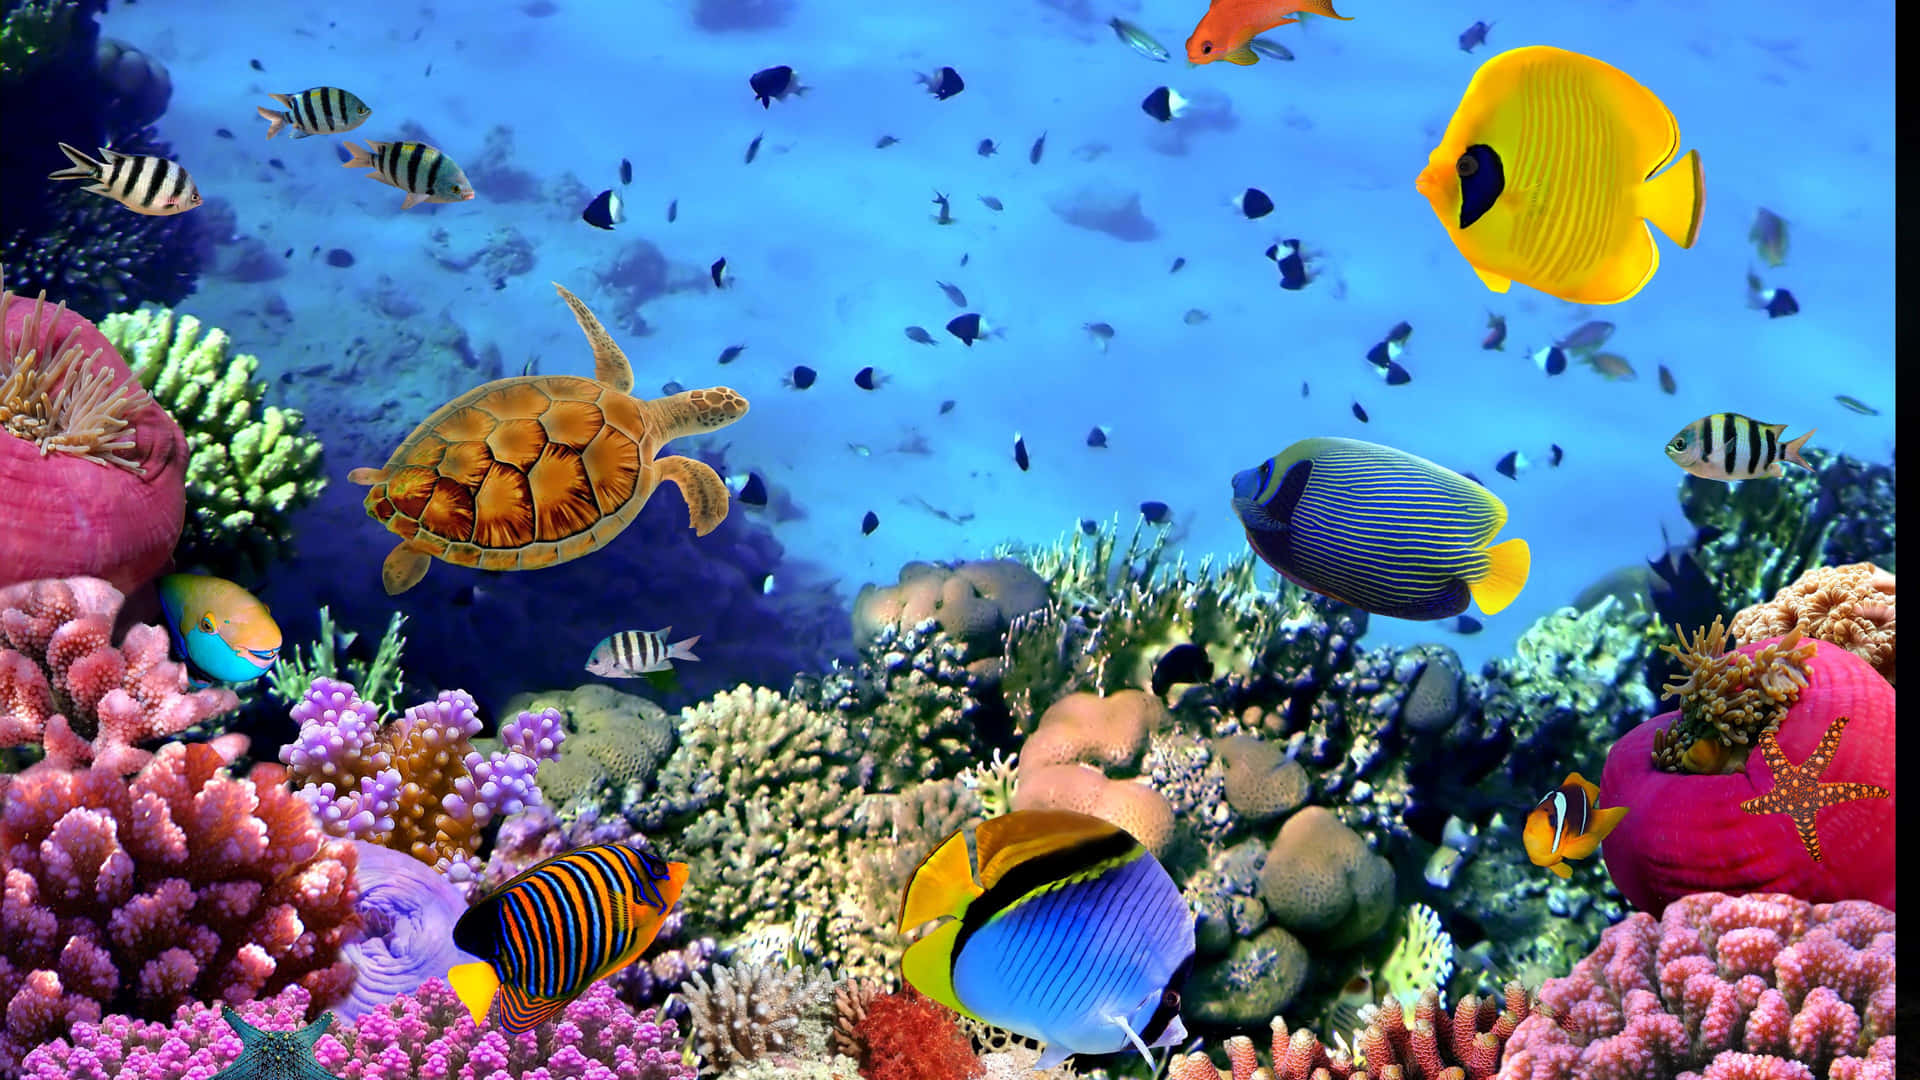 4k Fish And Other Marine Life Wallpaper